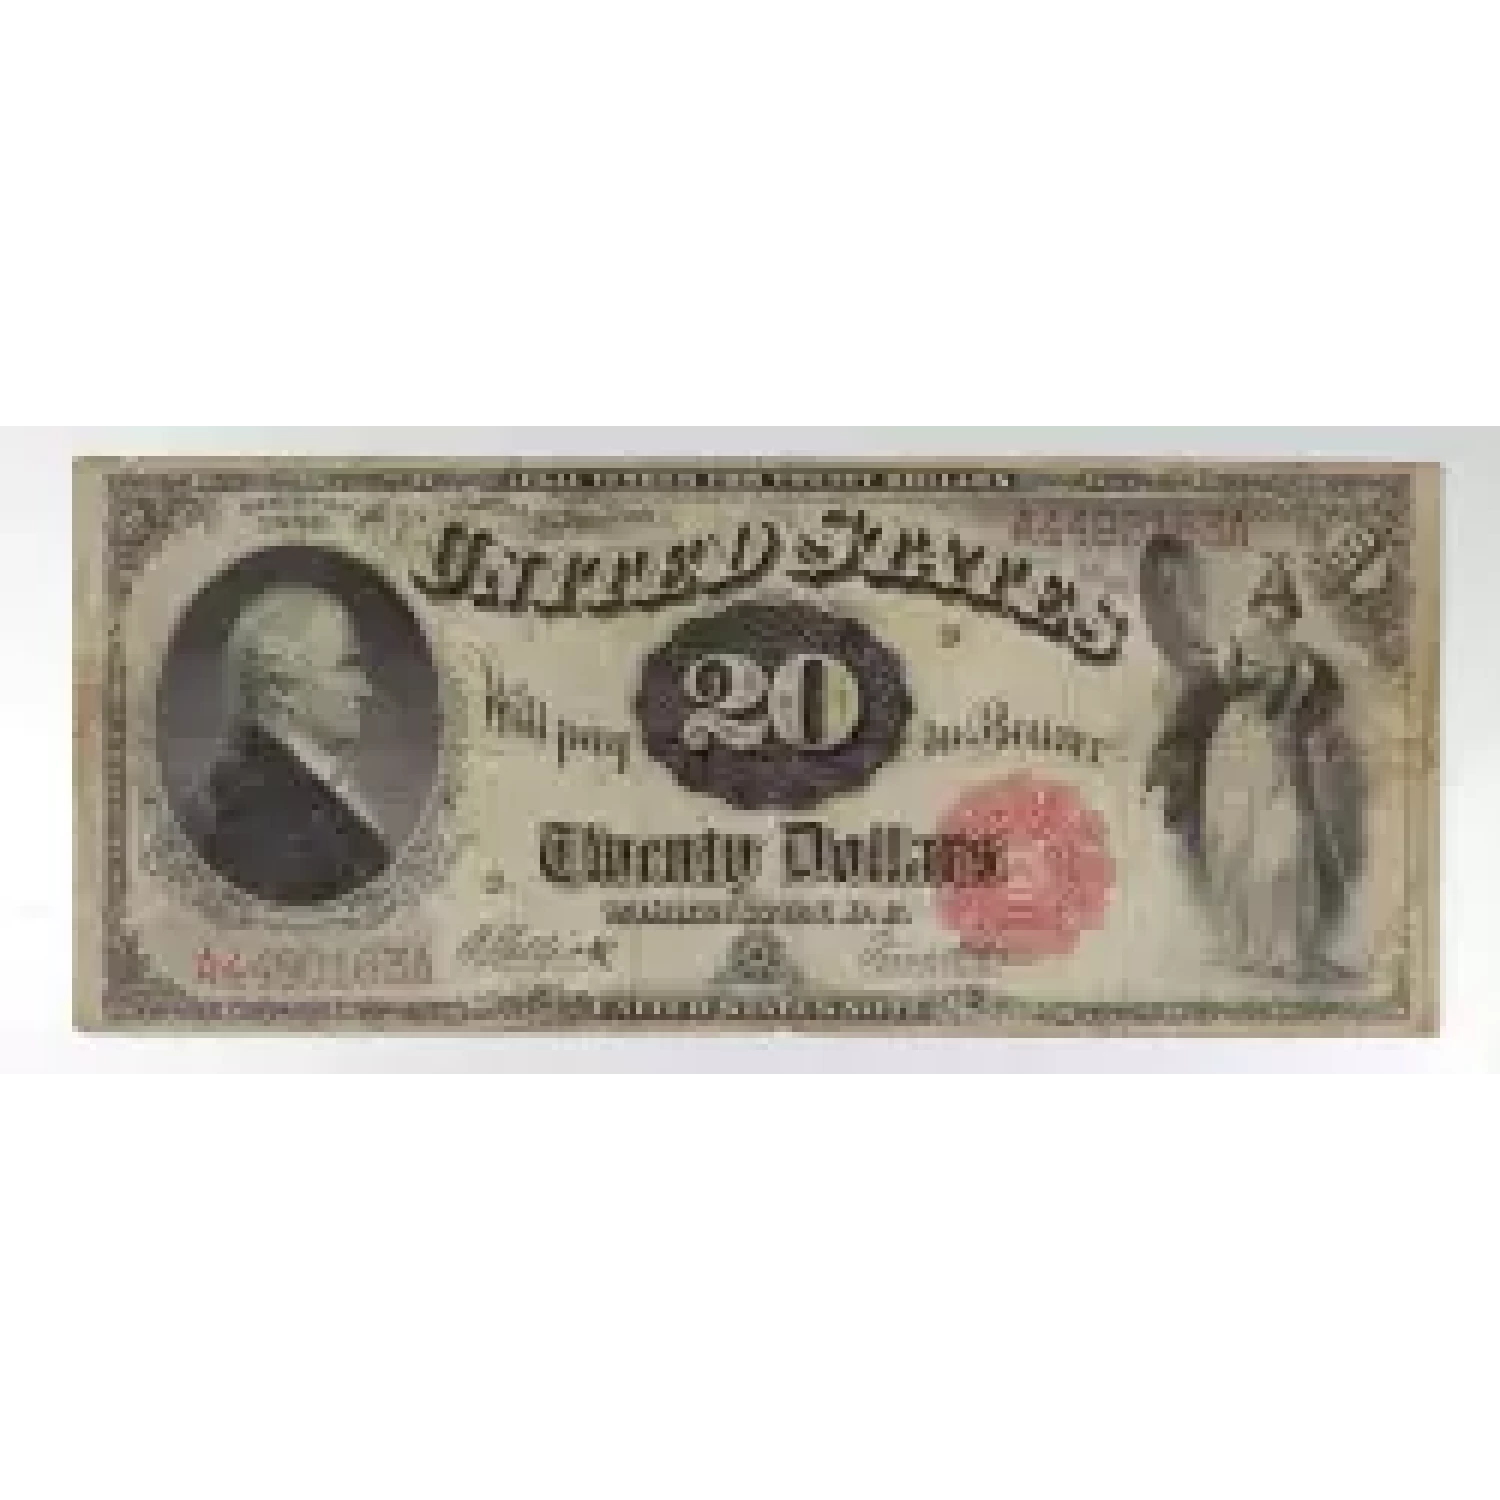 $20  Small Red, scalloped Legal Tender Issues 147